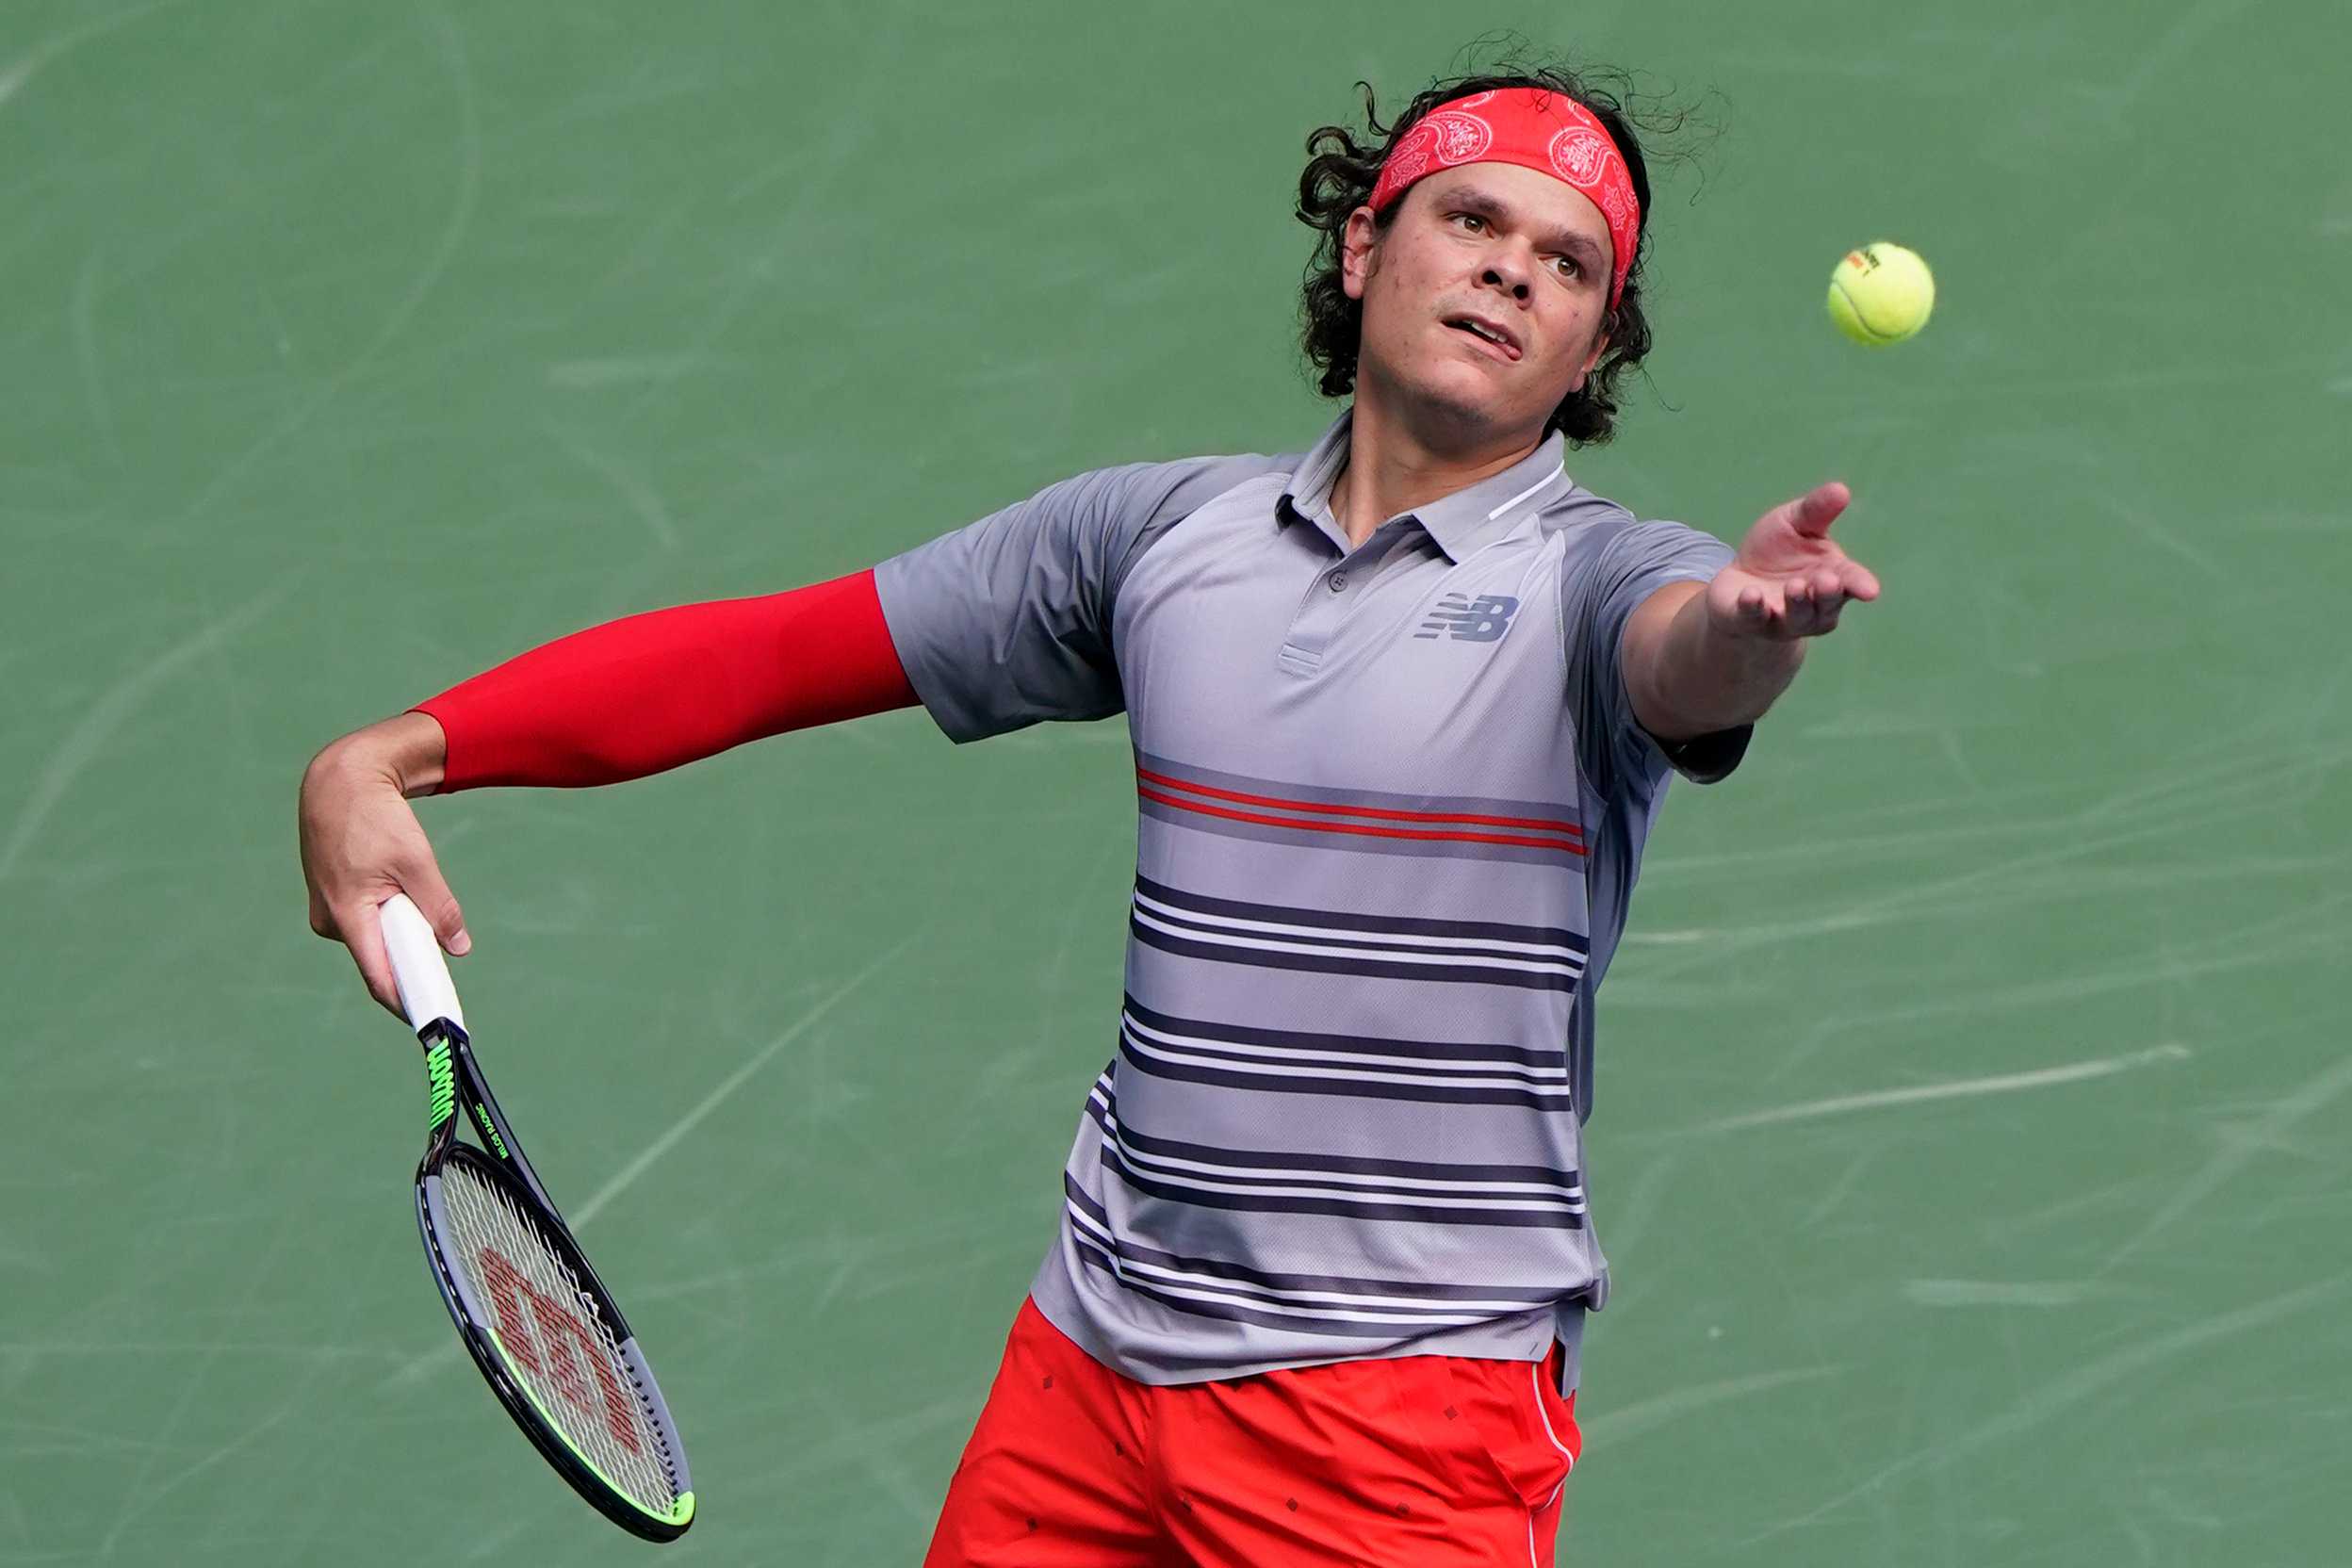 “Don’t Know What The Reason Is”: Milos Raonic Calls Out the New Players’ Association to Include WTA